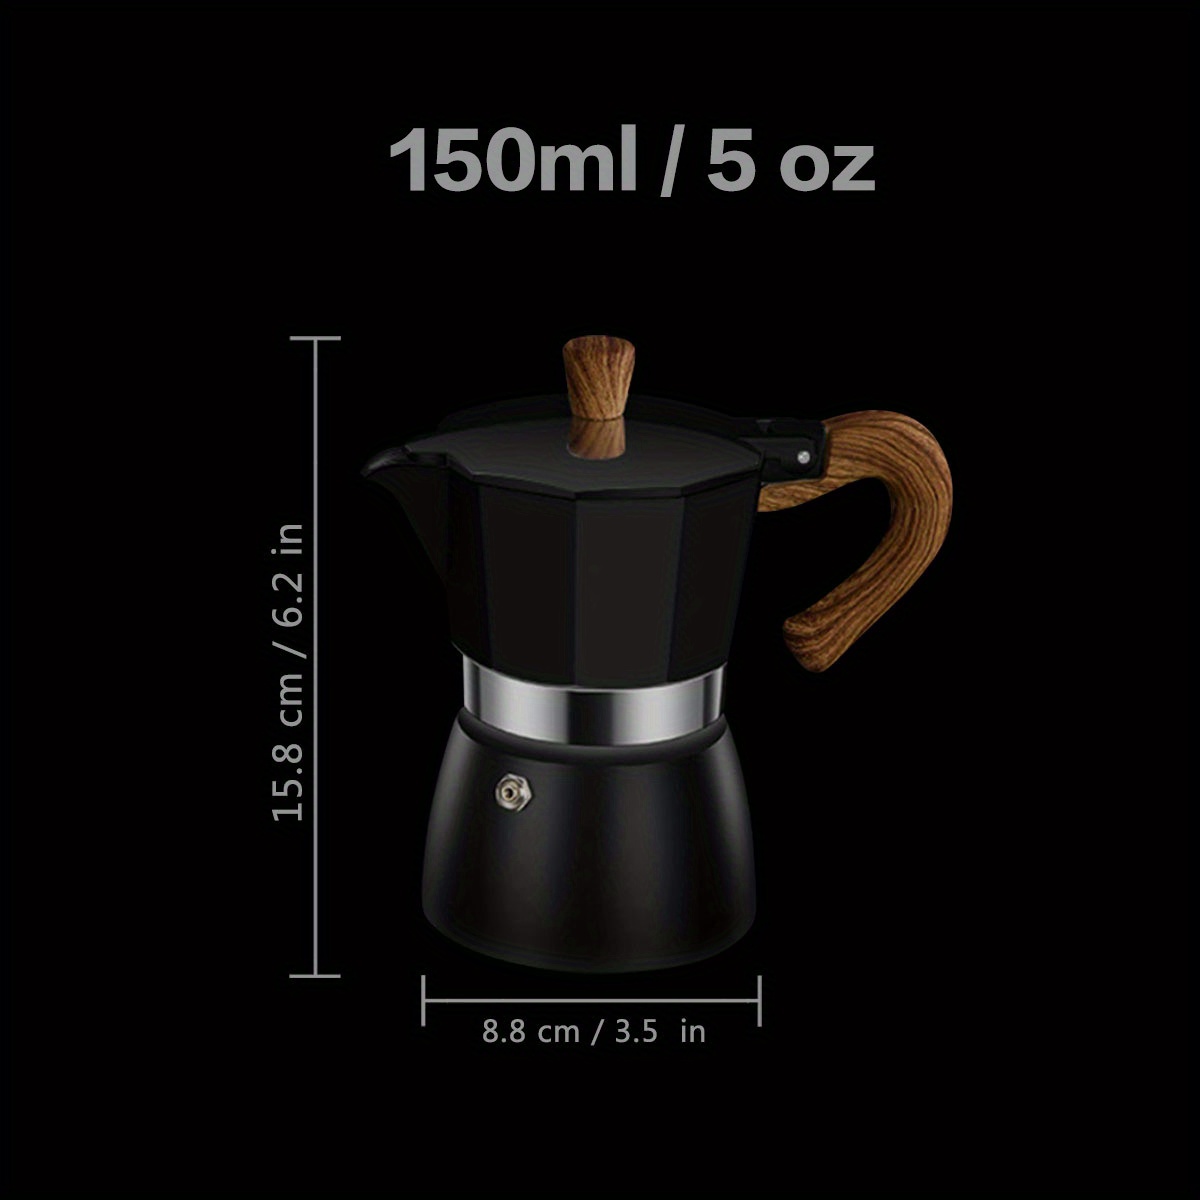 Top 5 Moka Pots to Achieve the Perfect Espresso Shot Every Time